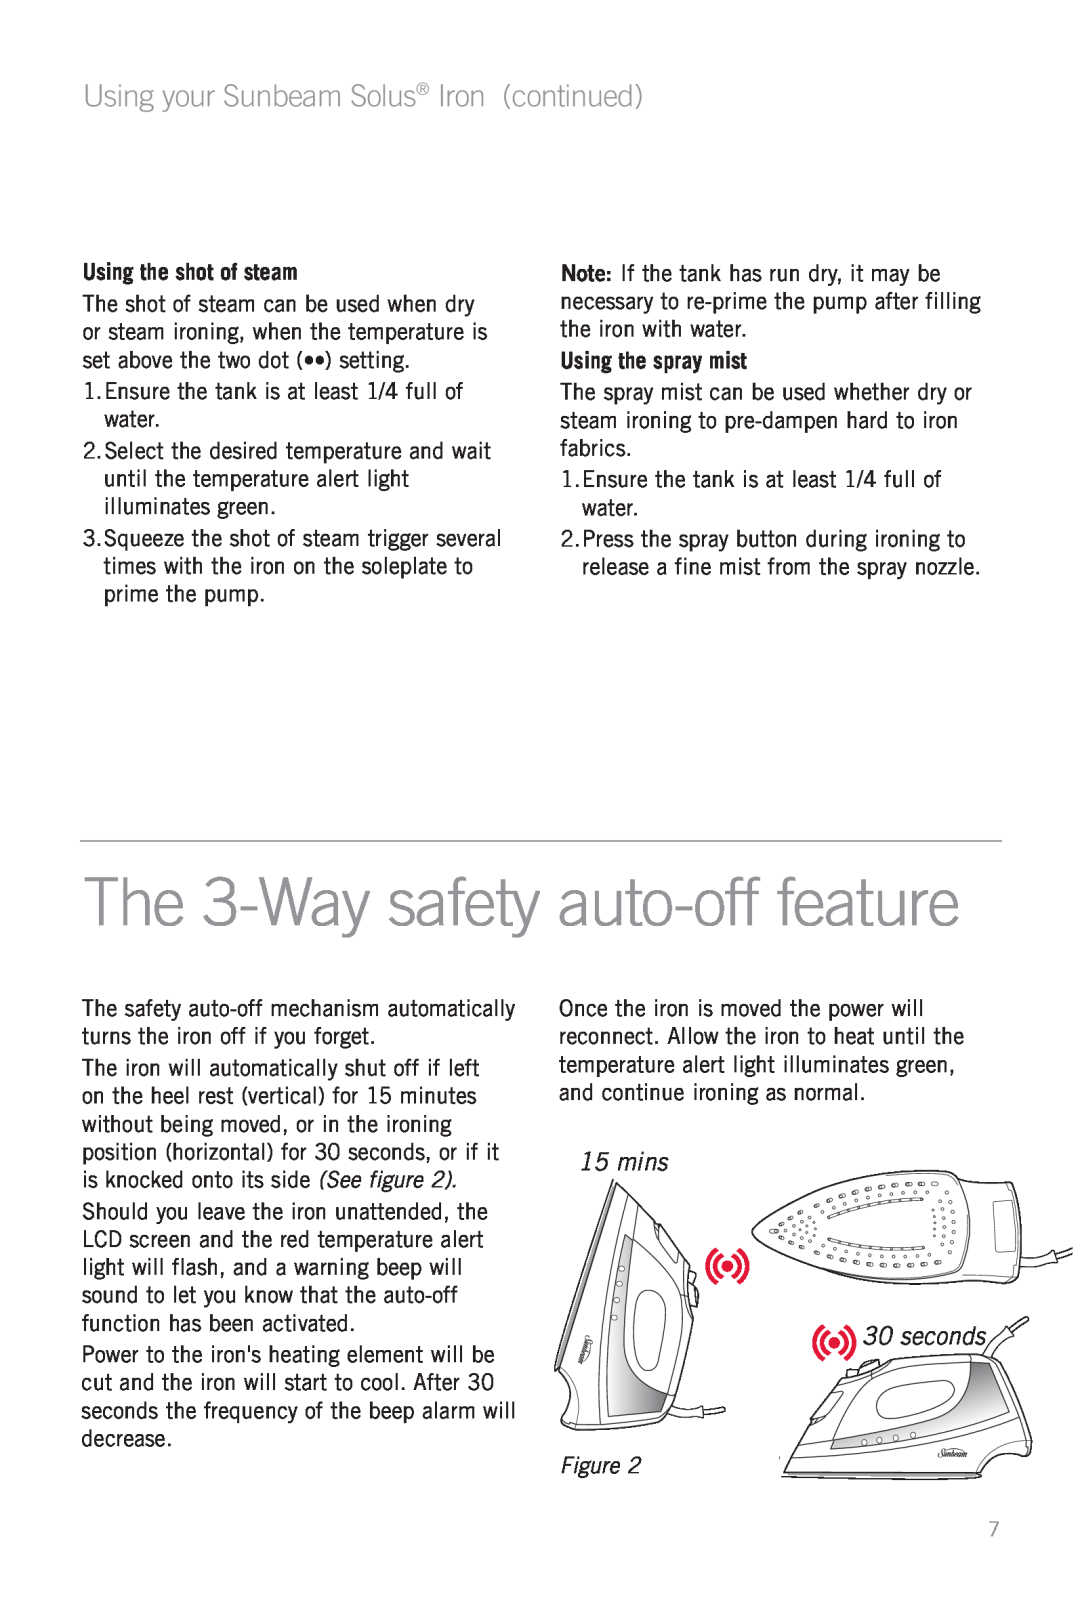 Sunbeam SR7000 manual The 3-Waysafety auto-offfeature, Using your Sunbeam Solus Iron continued, mins 30 seconds 